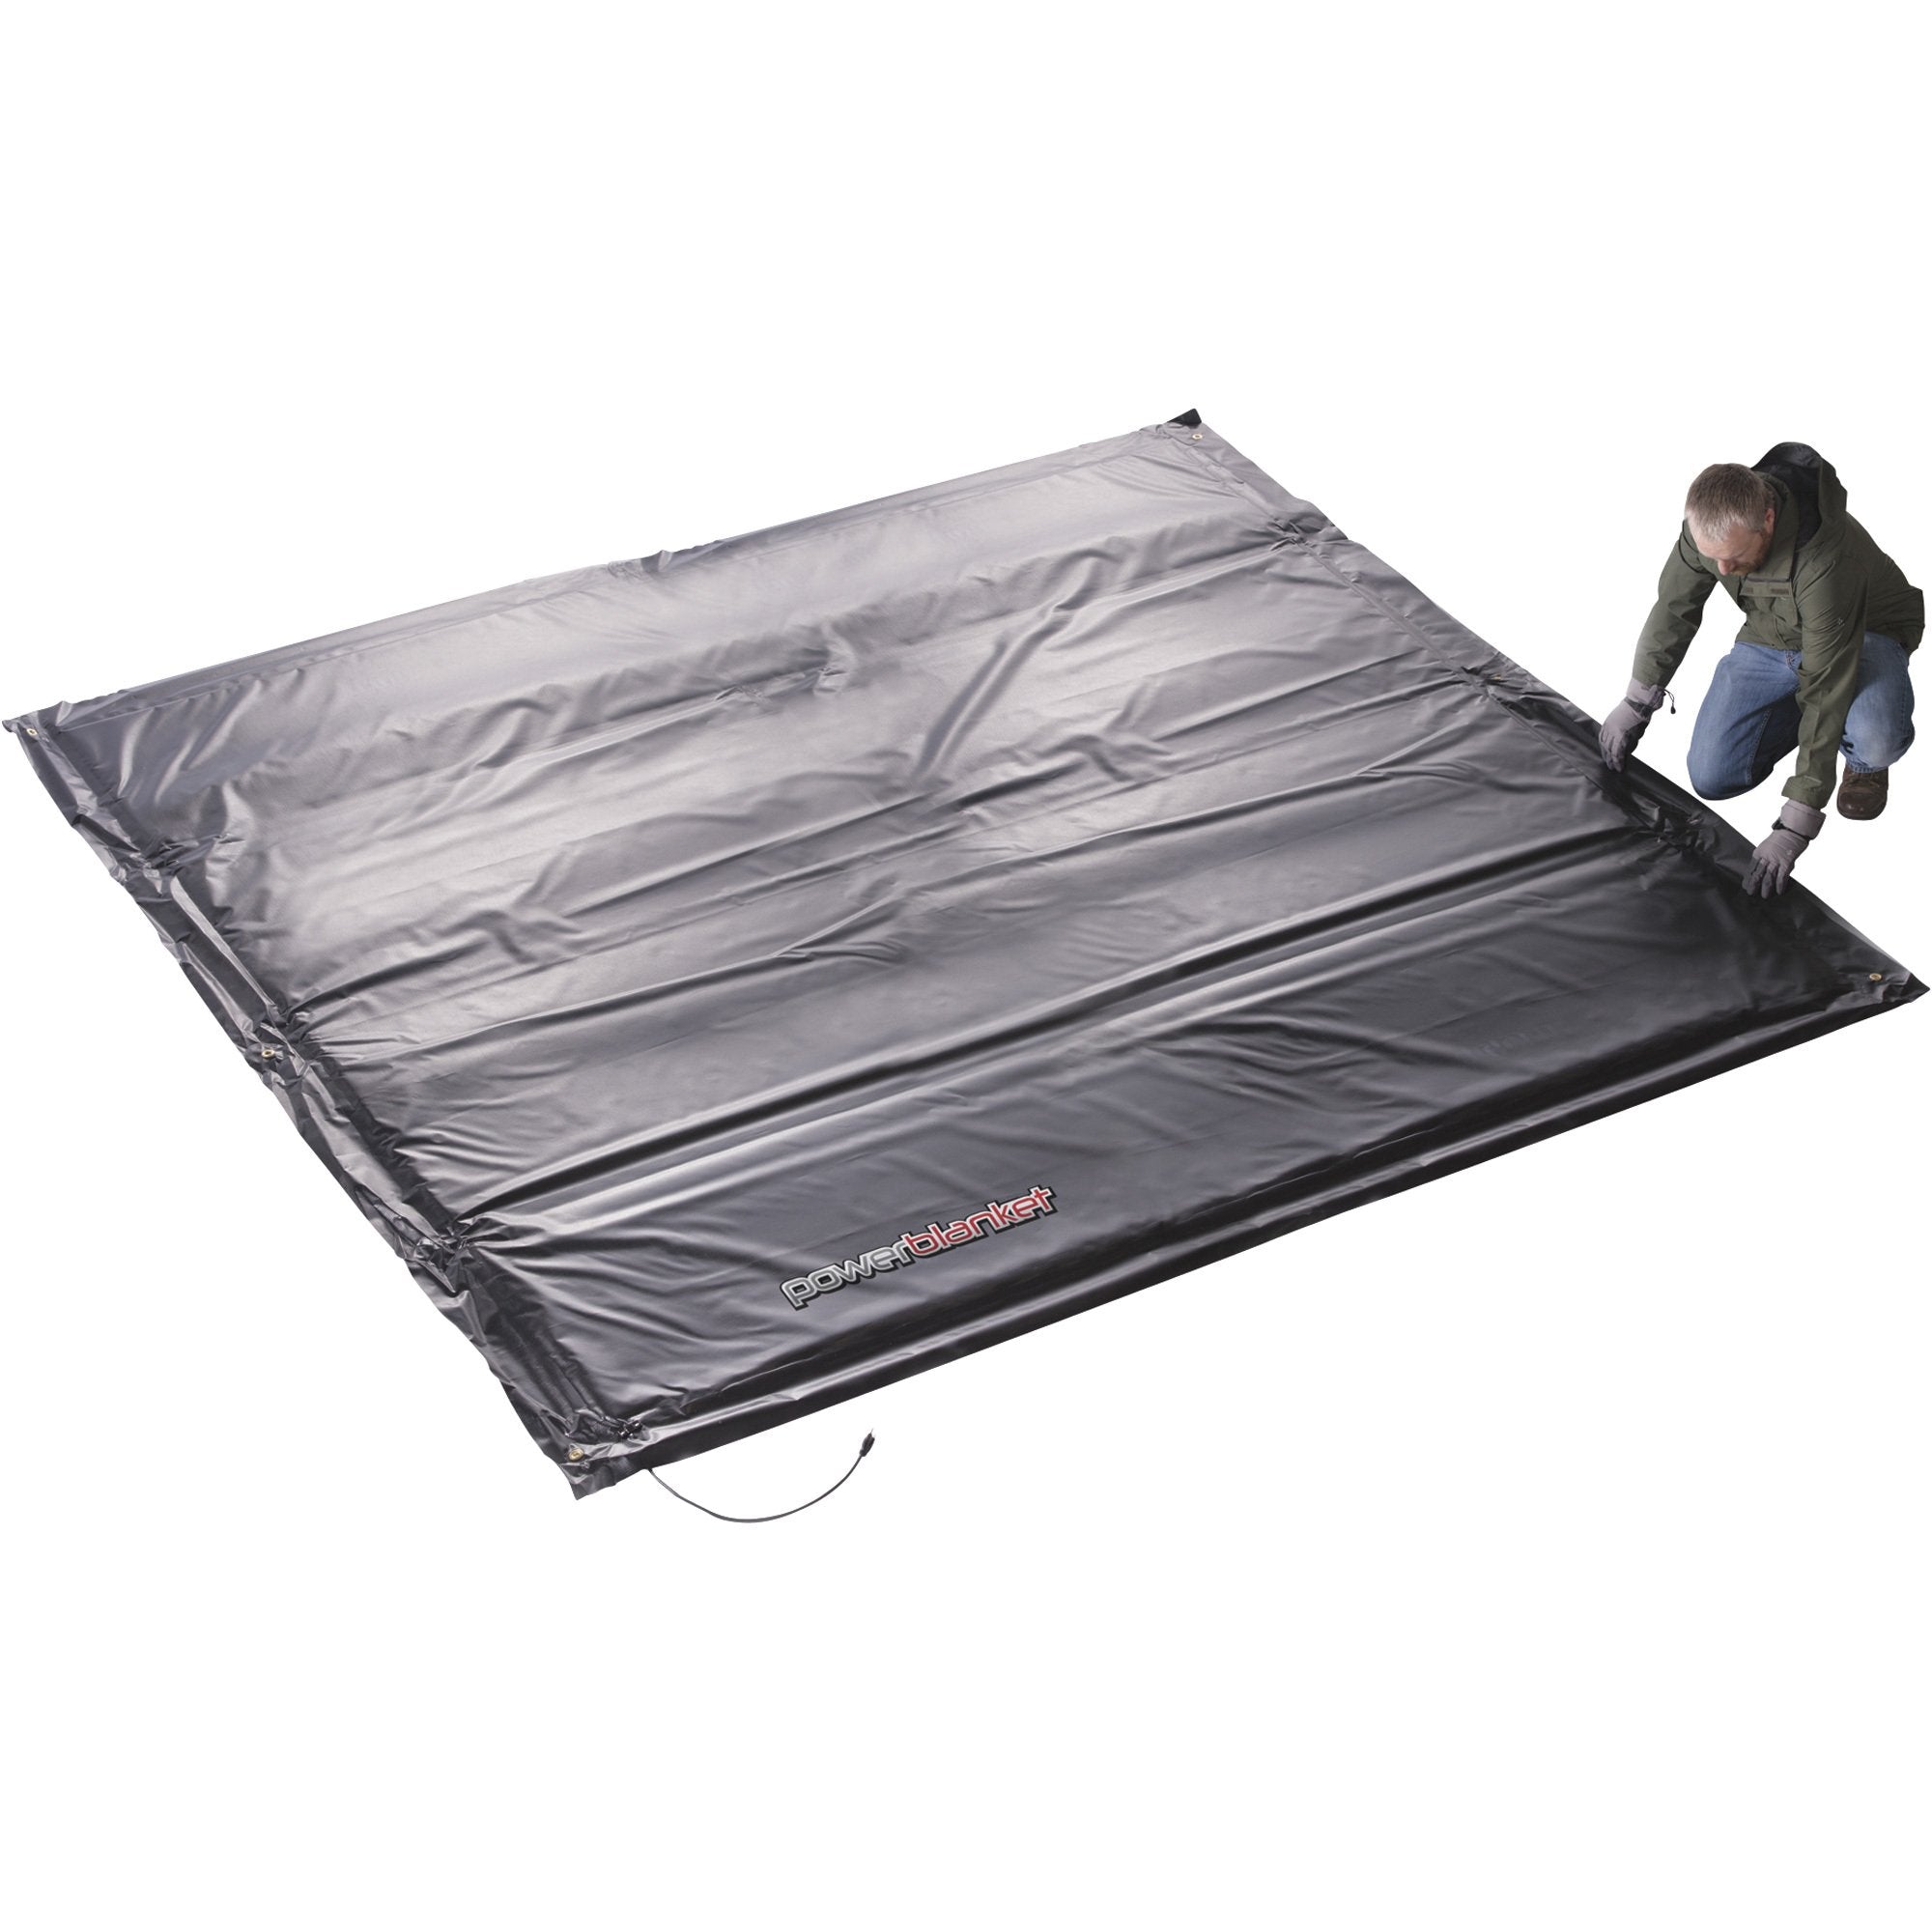 Powerblanket MD1010 10' x 10' Concrete Curing Blanket New